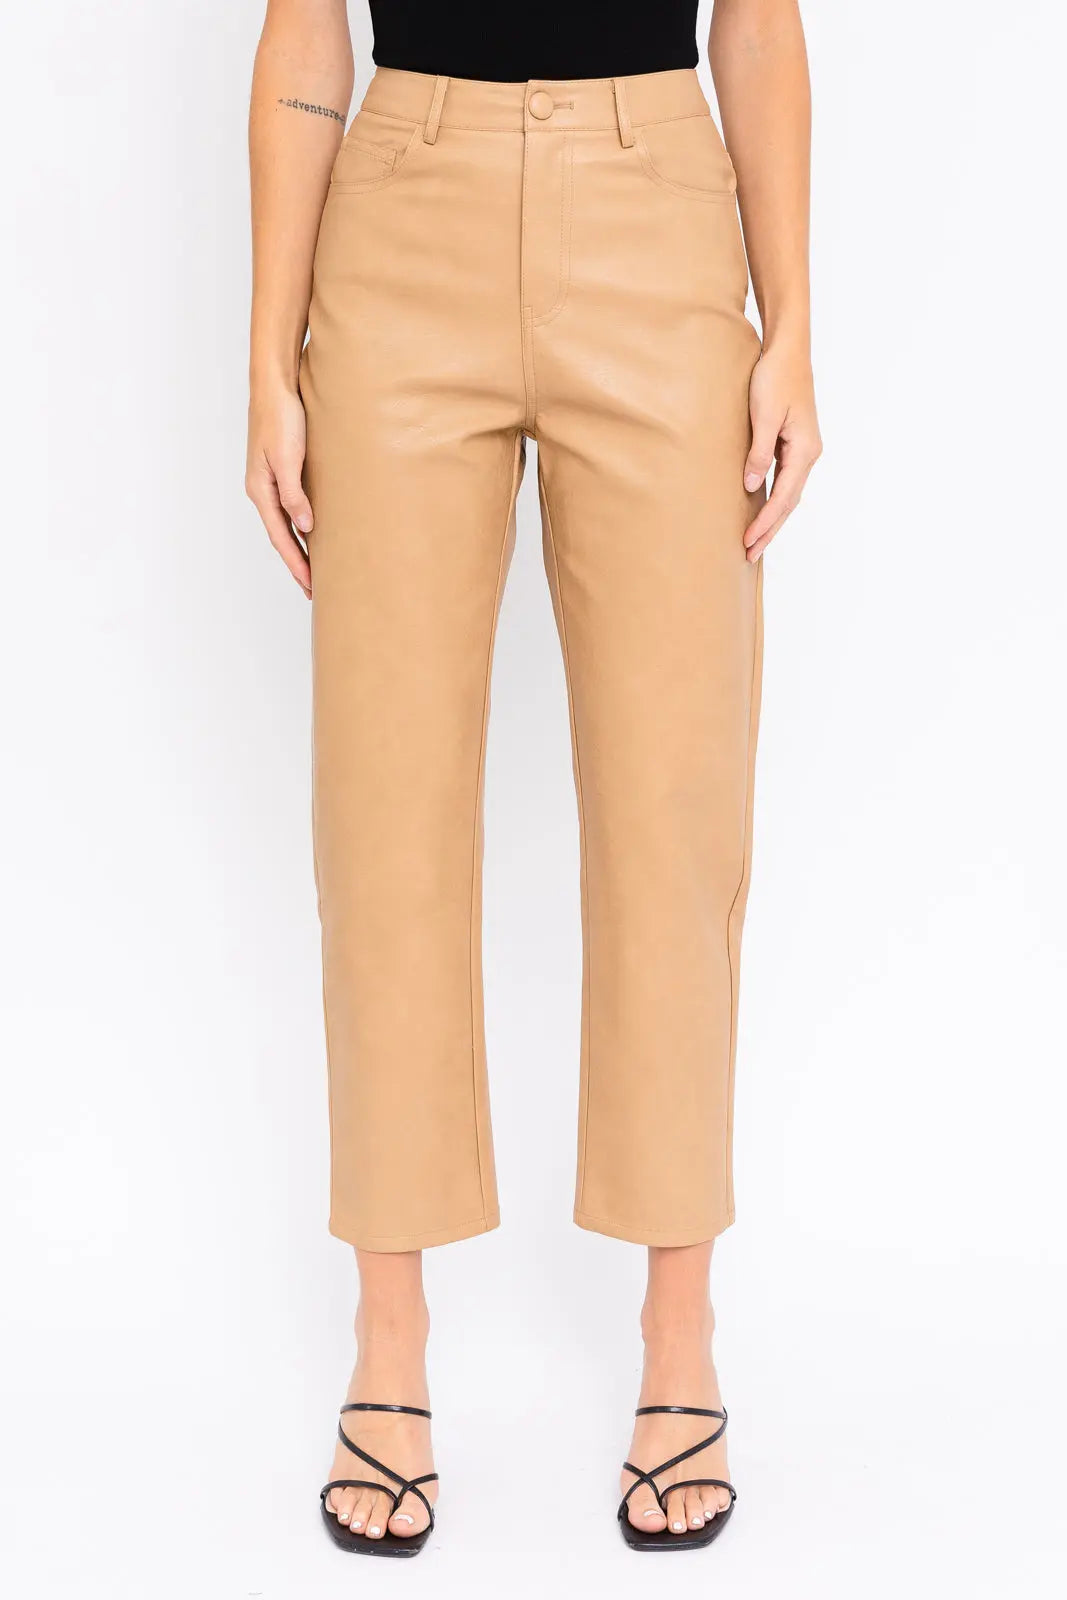 The Tiny Details showcasing Tan Faux Leather Straight Leg Pants for women